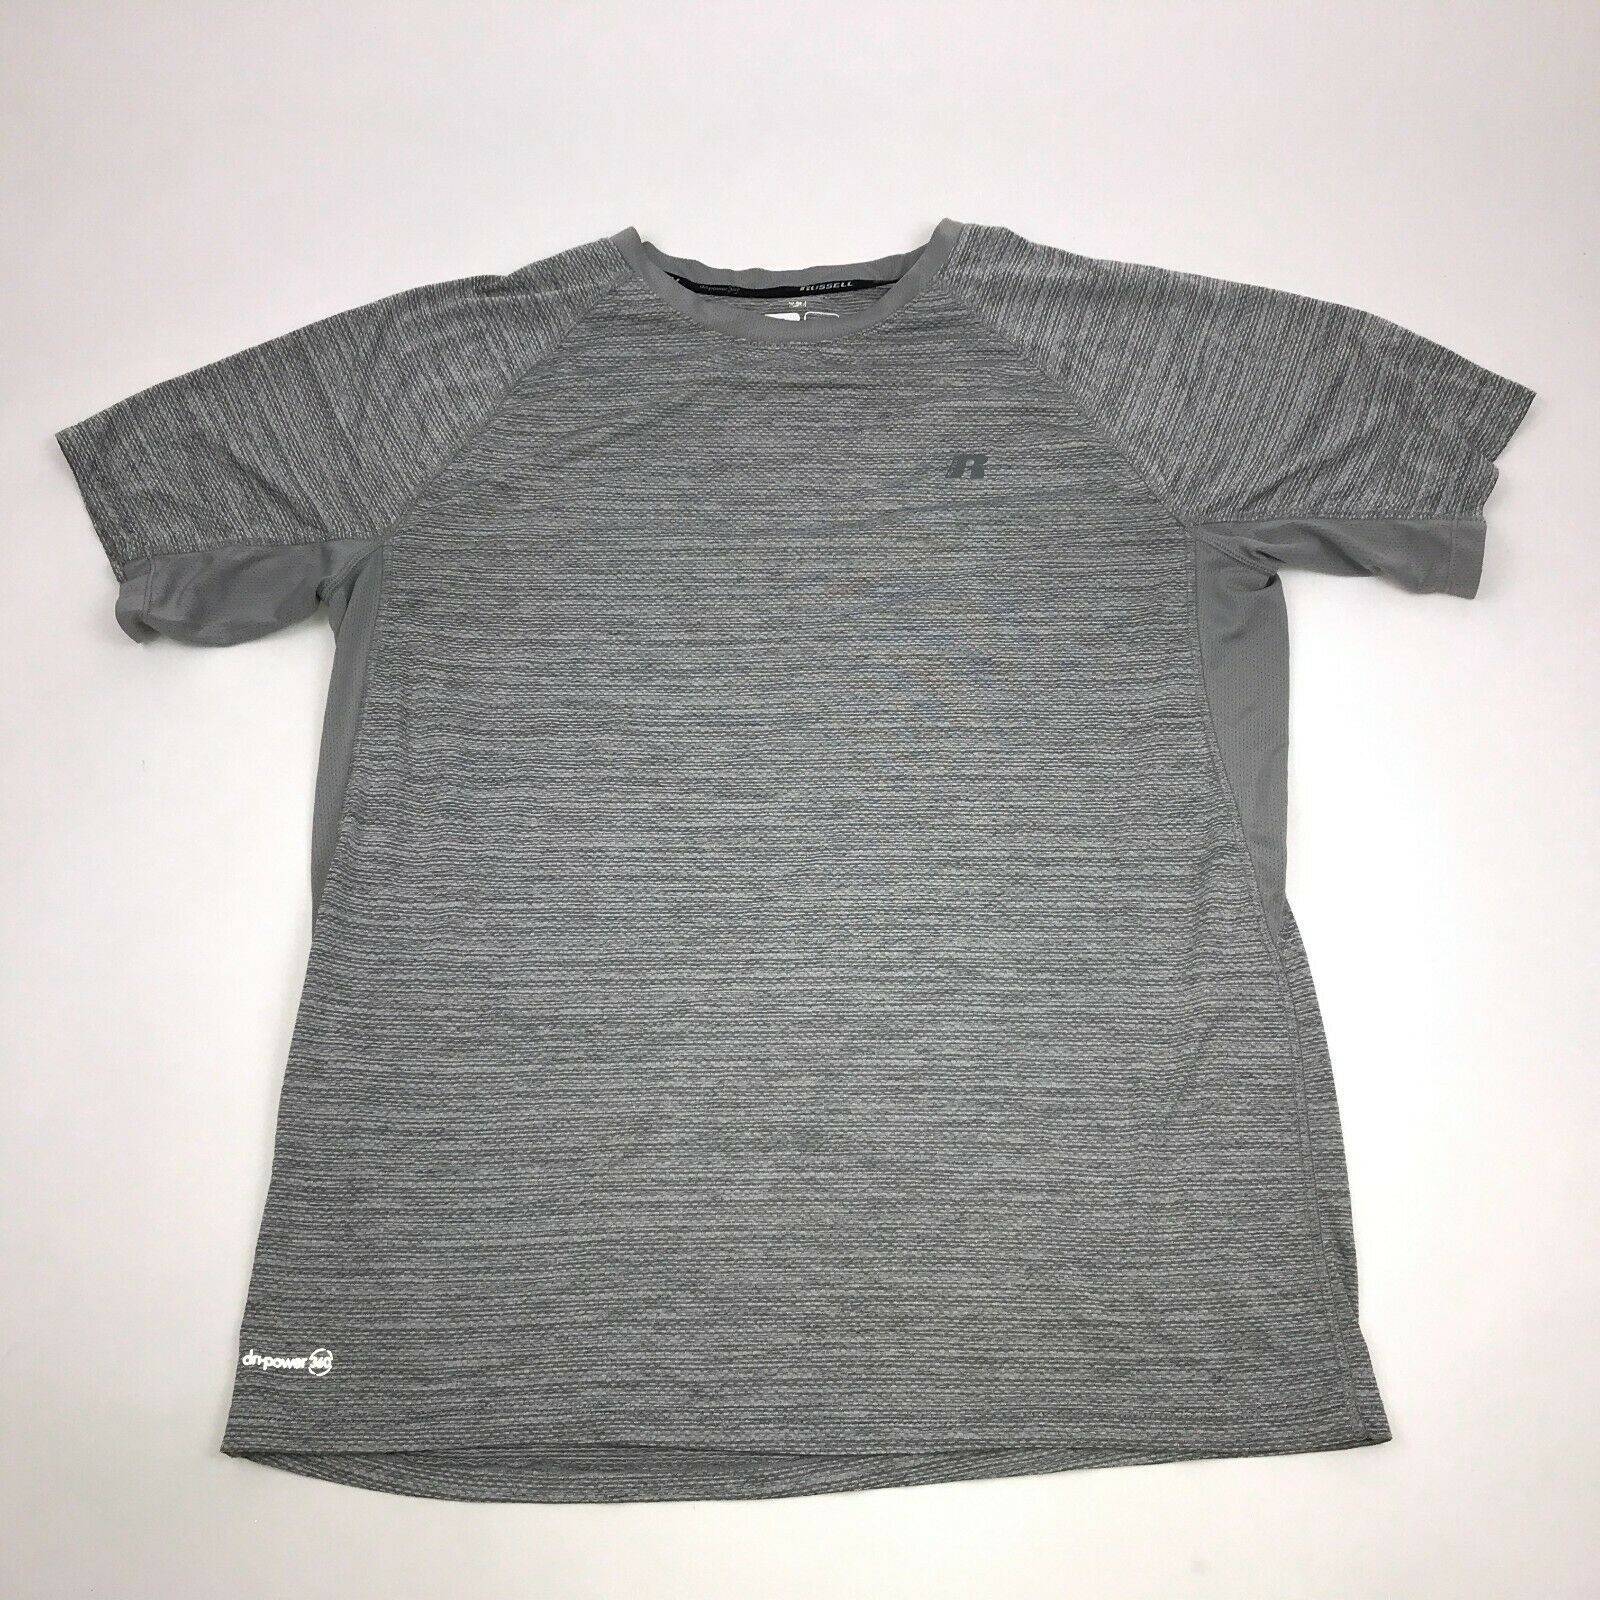 Russell Dry Fit Gym Shirt Men's Size Large 42-44 Regular Fit Gray Dri ...